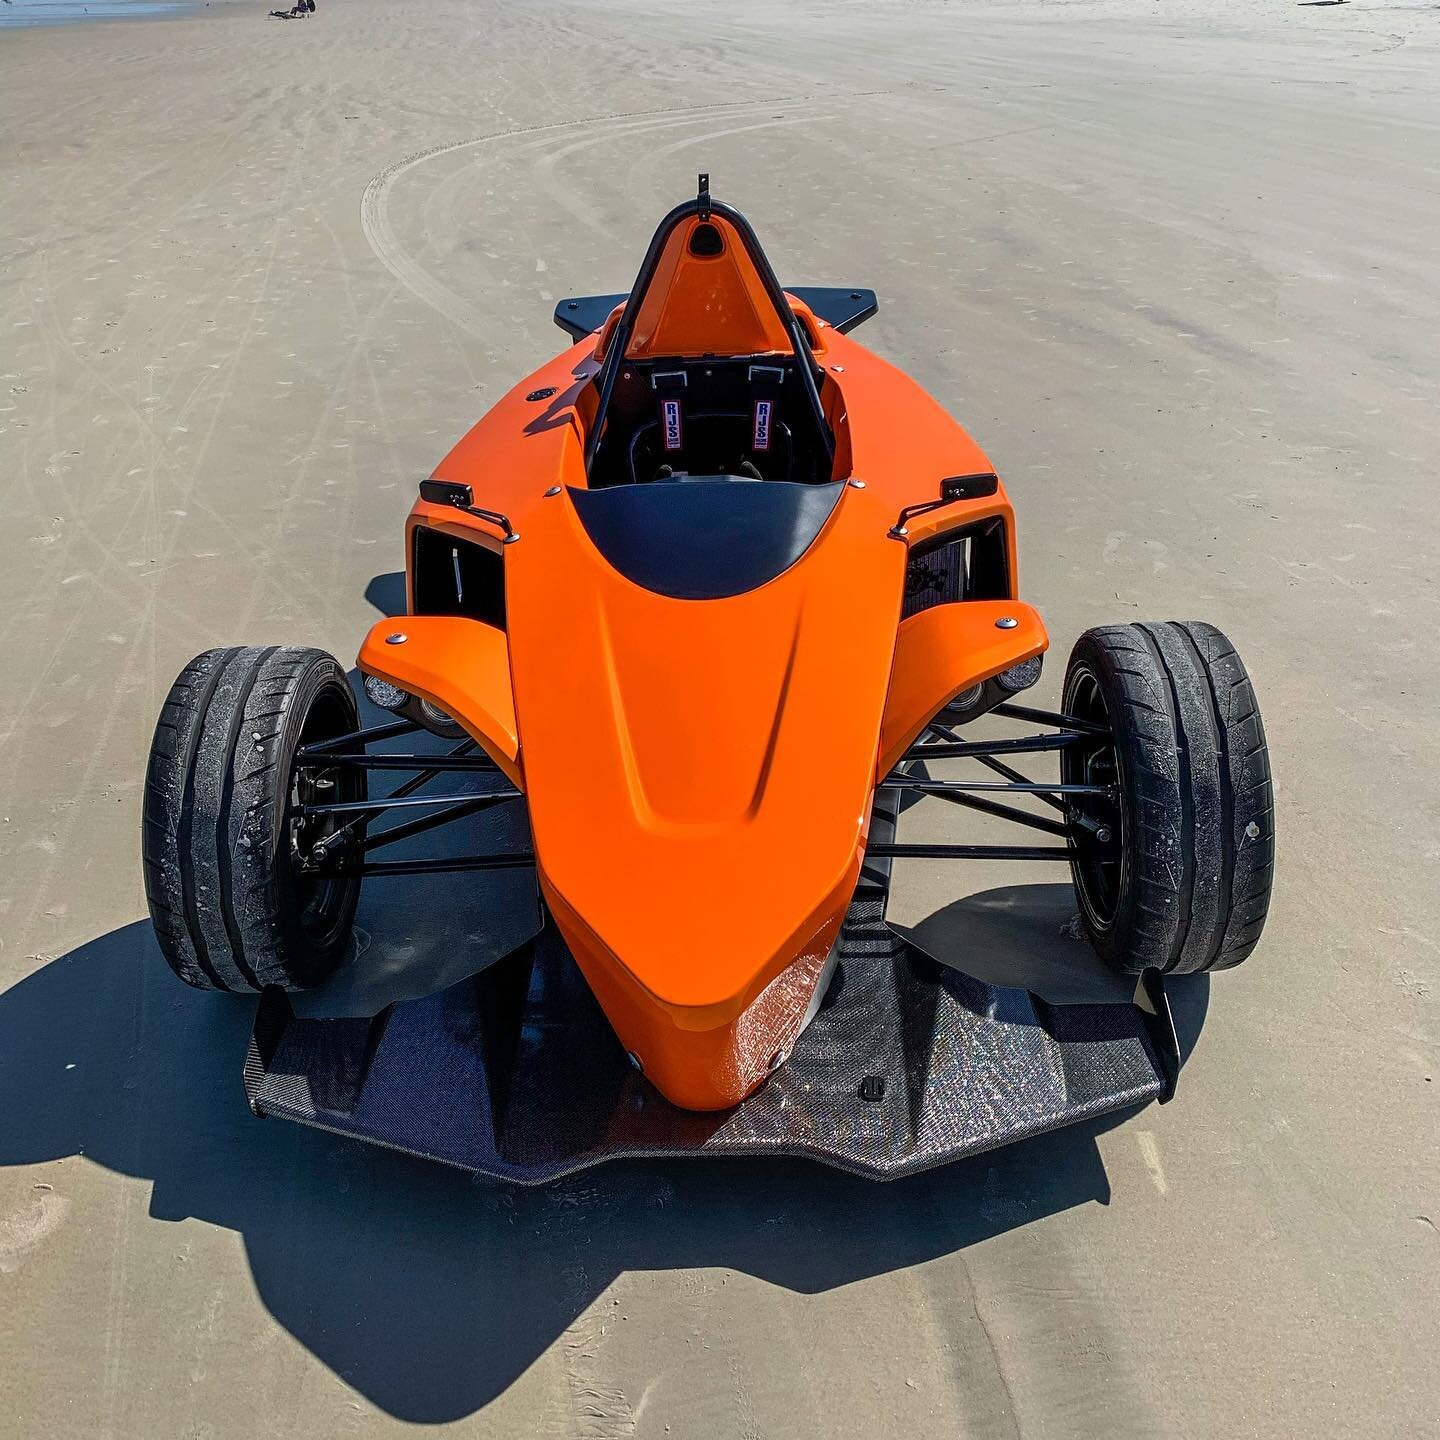 The Corso California RT, a Hayabusa-powered reverse trike that brings the thrill of F1 to the street!
&bull;
#corsoconcepts #corsocalifornia #corsocaliforniart #corsotrike #trike #autocycle #slingshot #hayabusa #hayabusatrike #3wheel #cars #carsofins